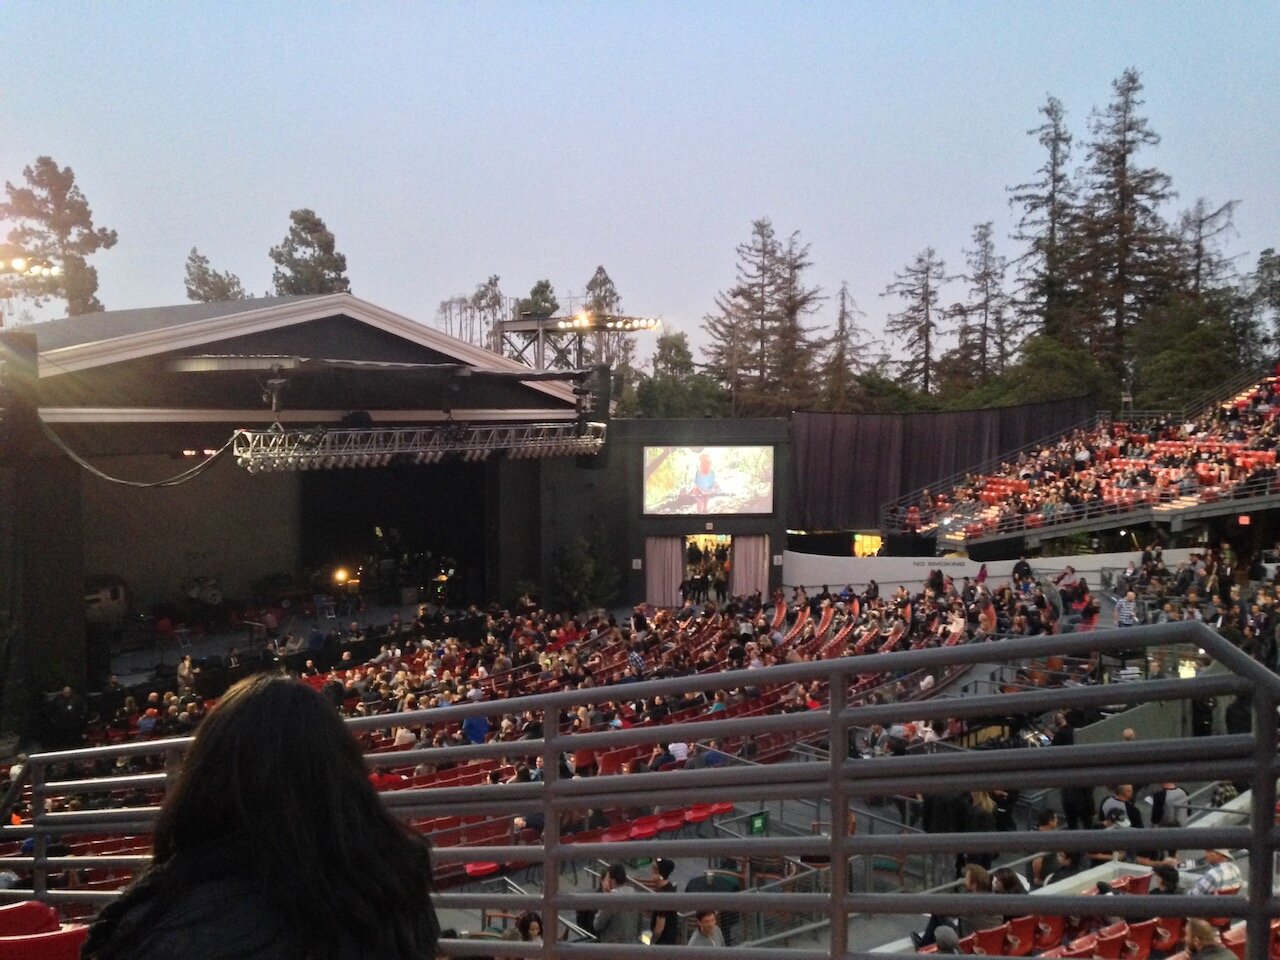    Failure, Puscifer, A Perfect Circle concert @ The Greek Theater in Los Angeles  5/10/14   